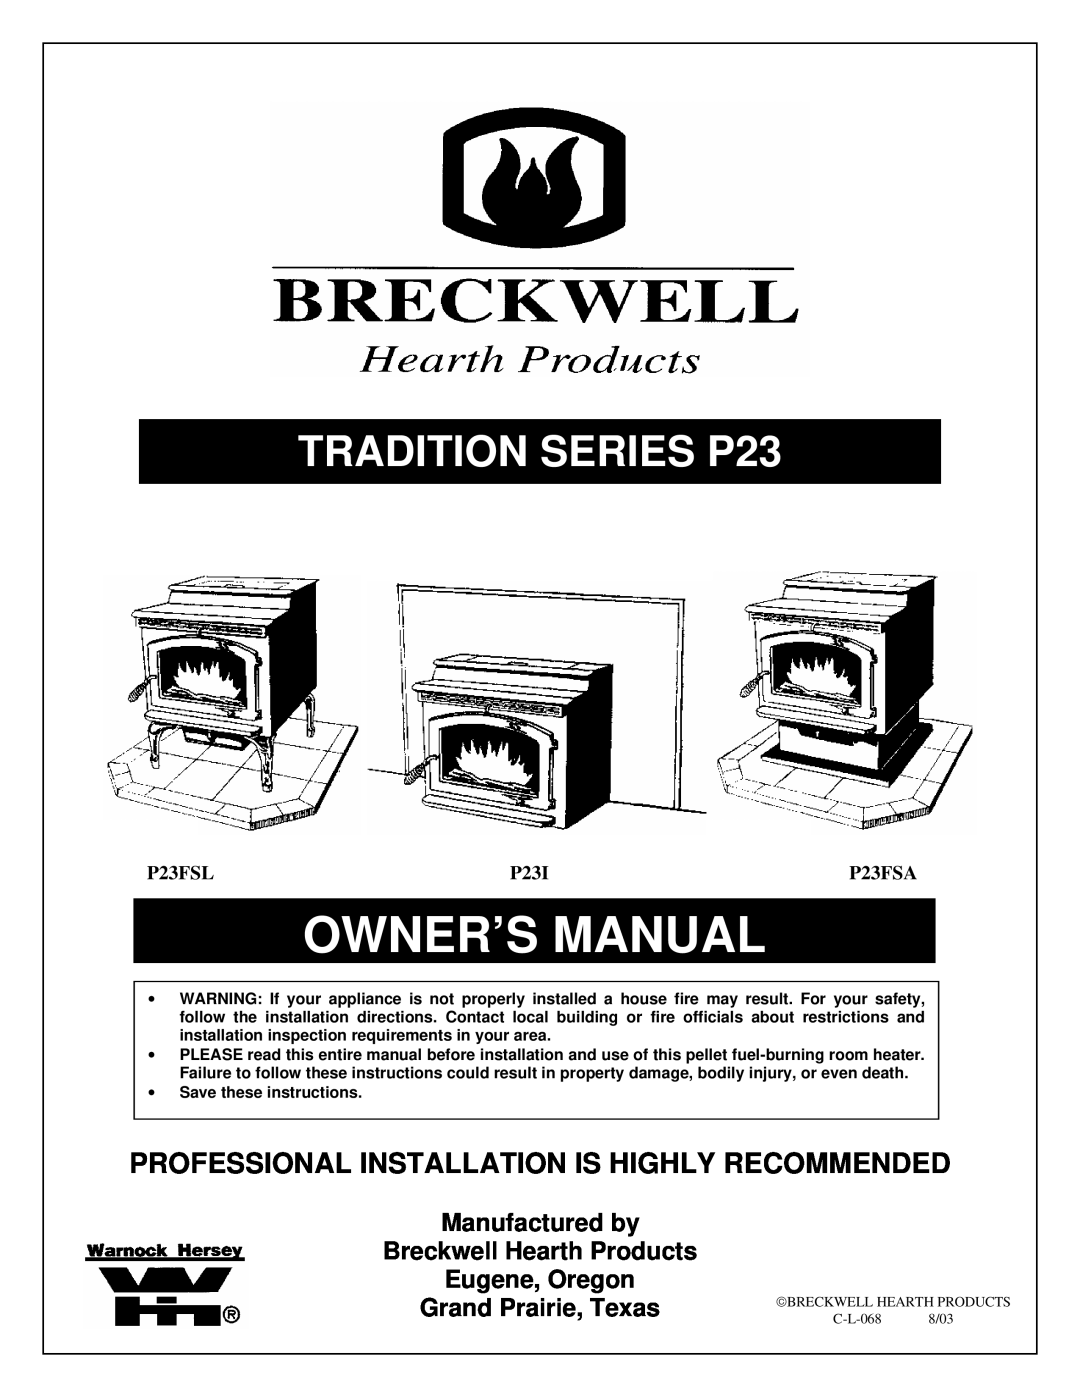 Breckwell P23FSA owner manual Manufactured by Breckwell Hearth Products, Eugene, Oregon Grand Prairie, Texas, P23FSL, P23I 